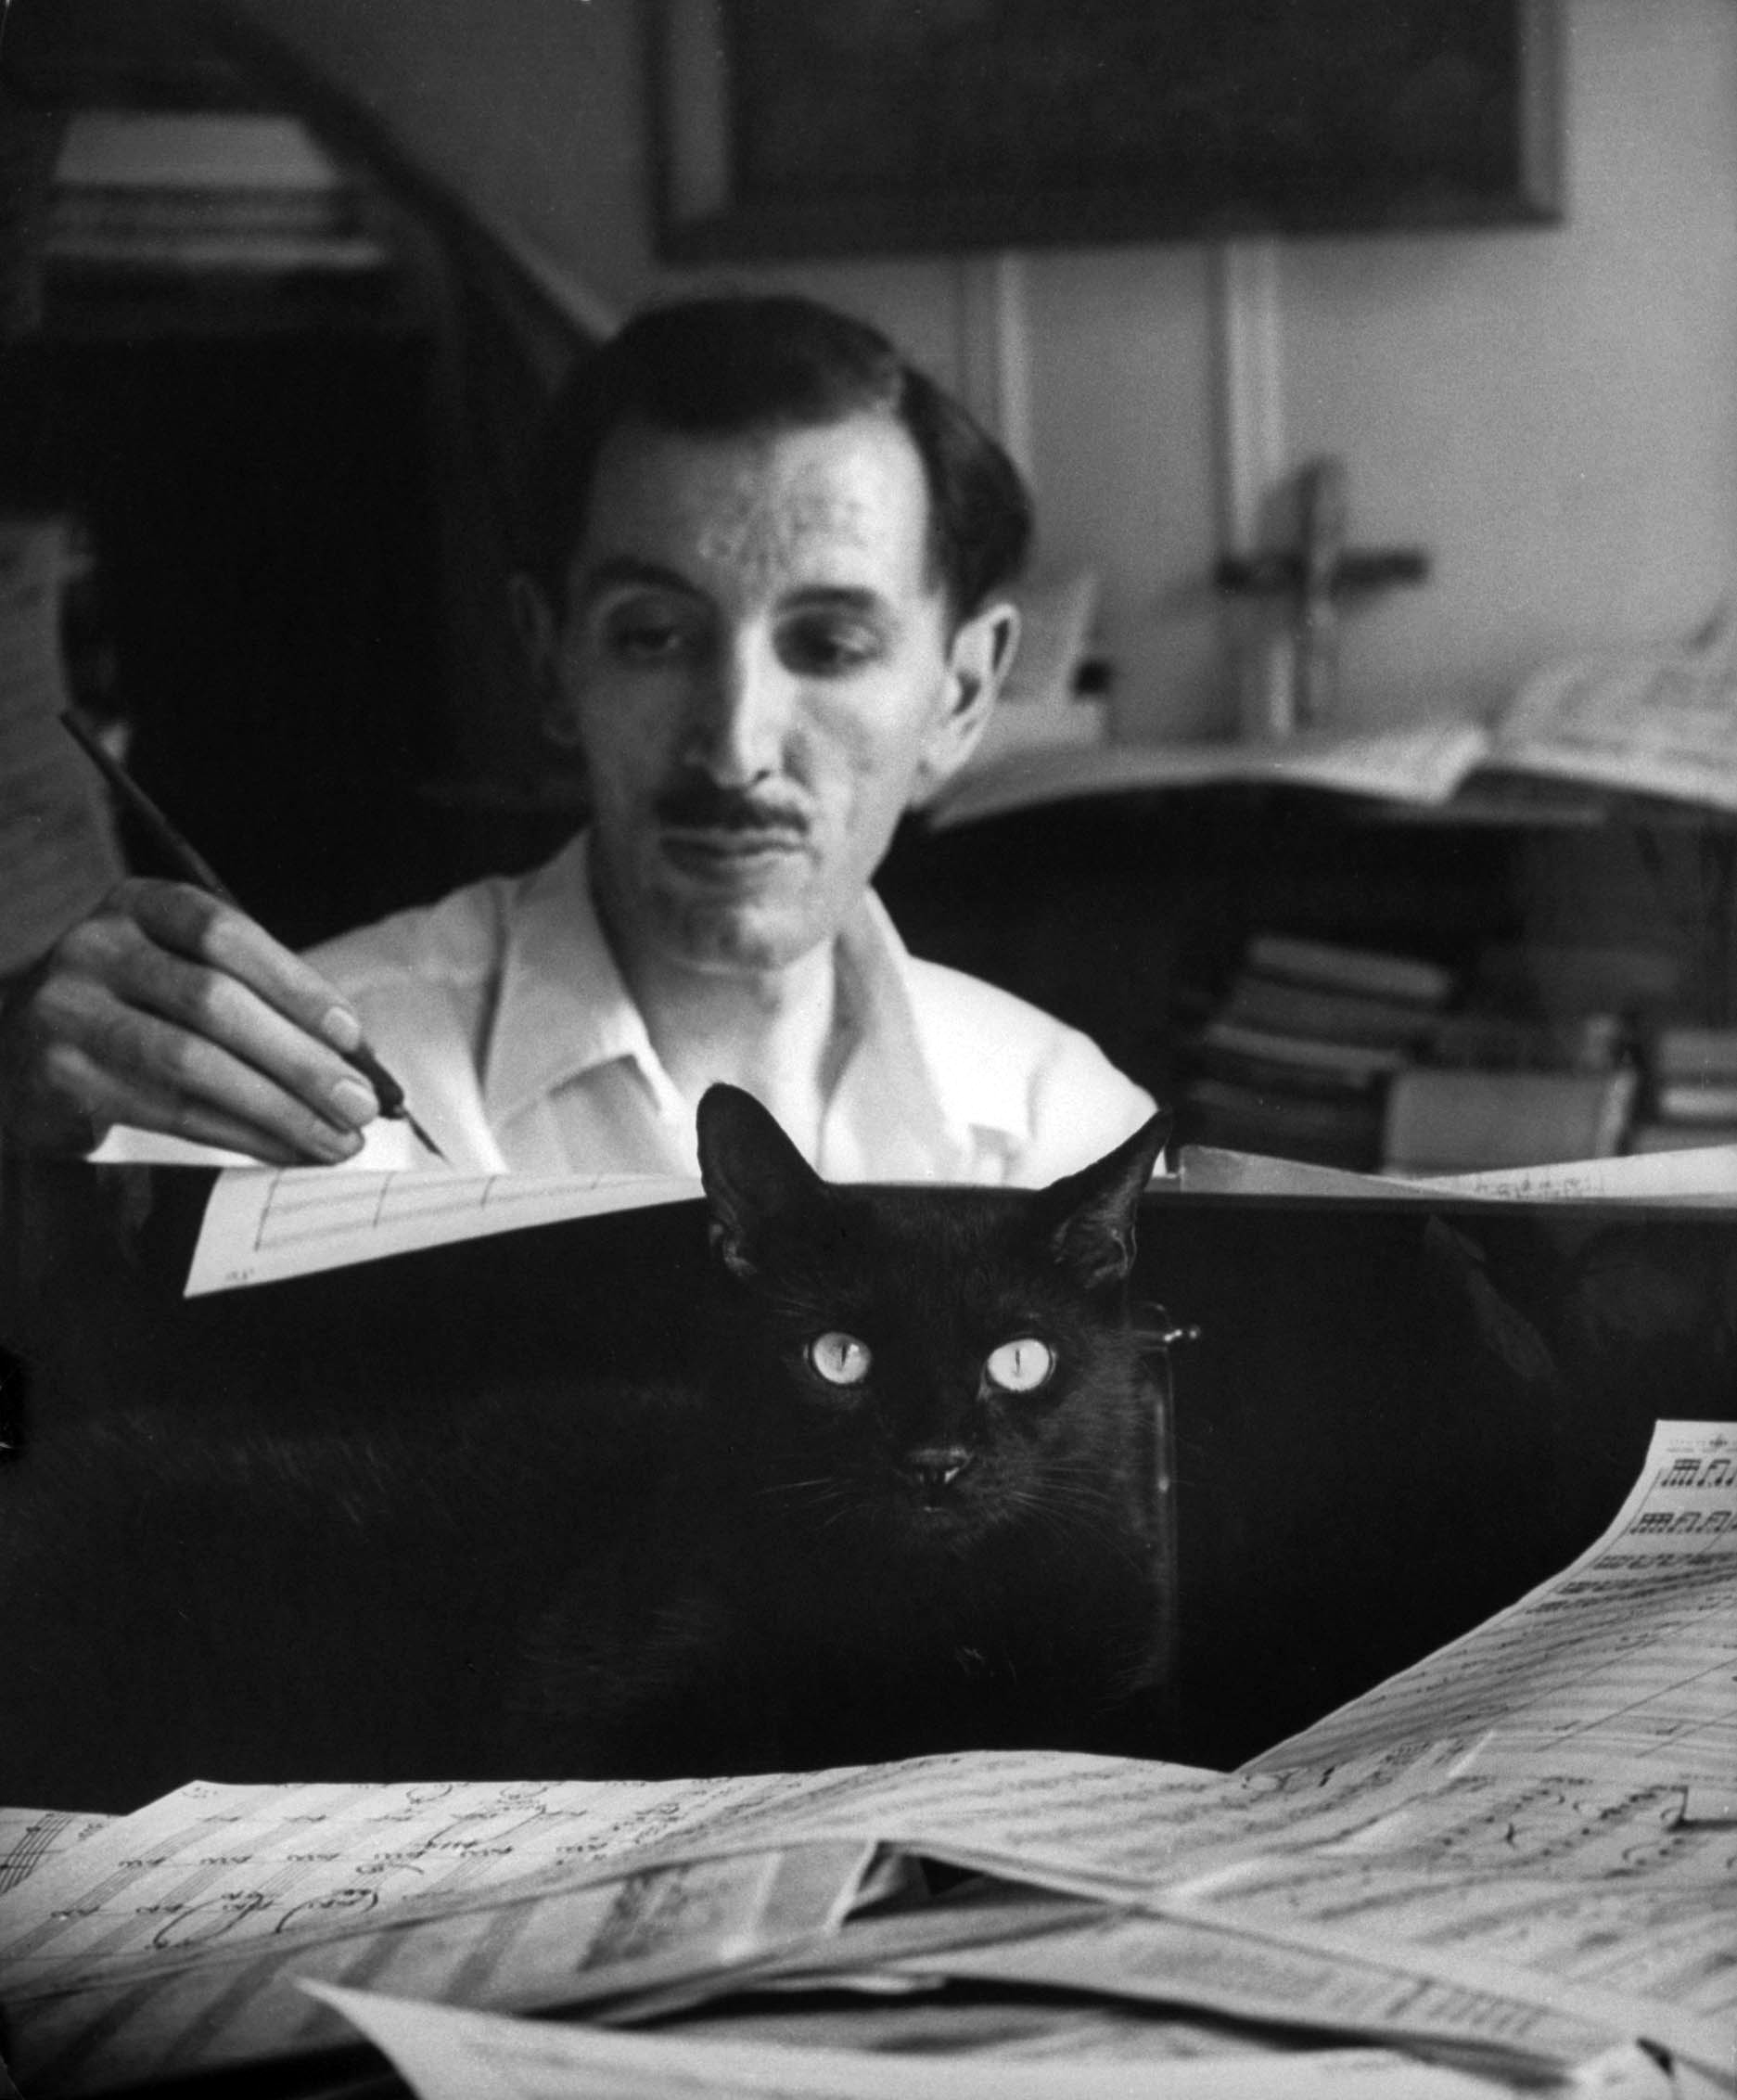 Composer Alan Hovhaness, working in score littered studio with a black cat nestling amongst the papers on the piano, 1955.